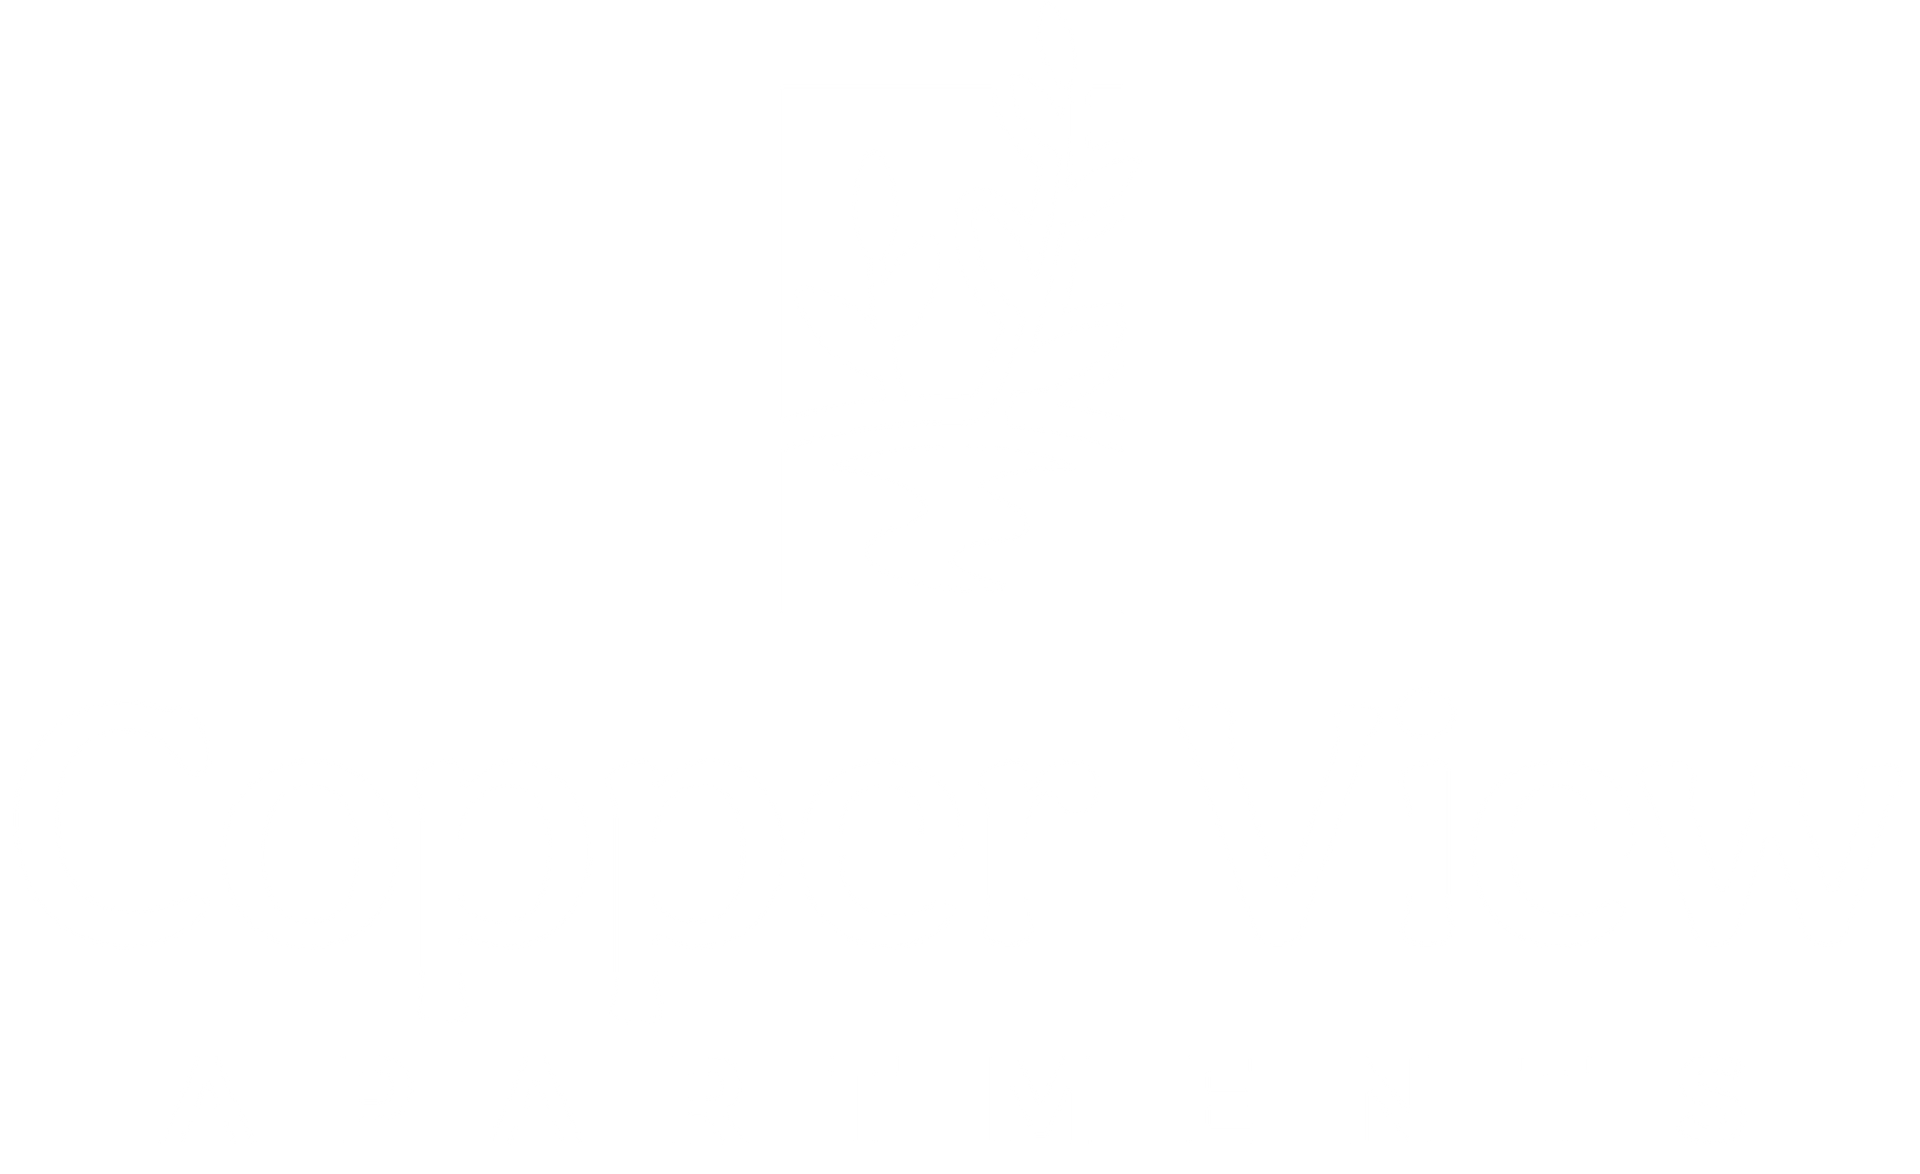 Copper View Apartments Logo - Footer